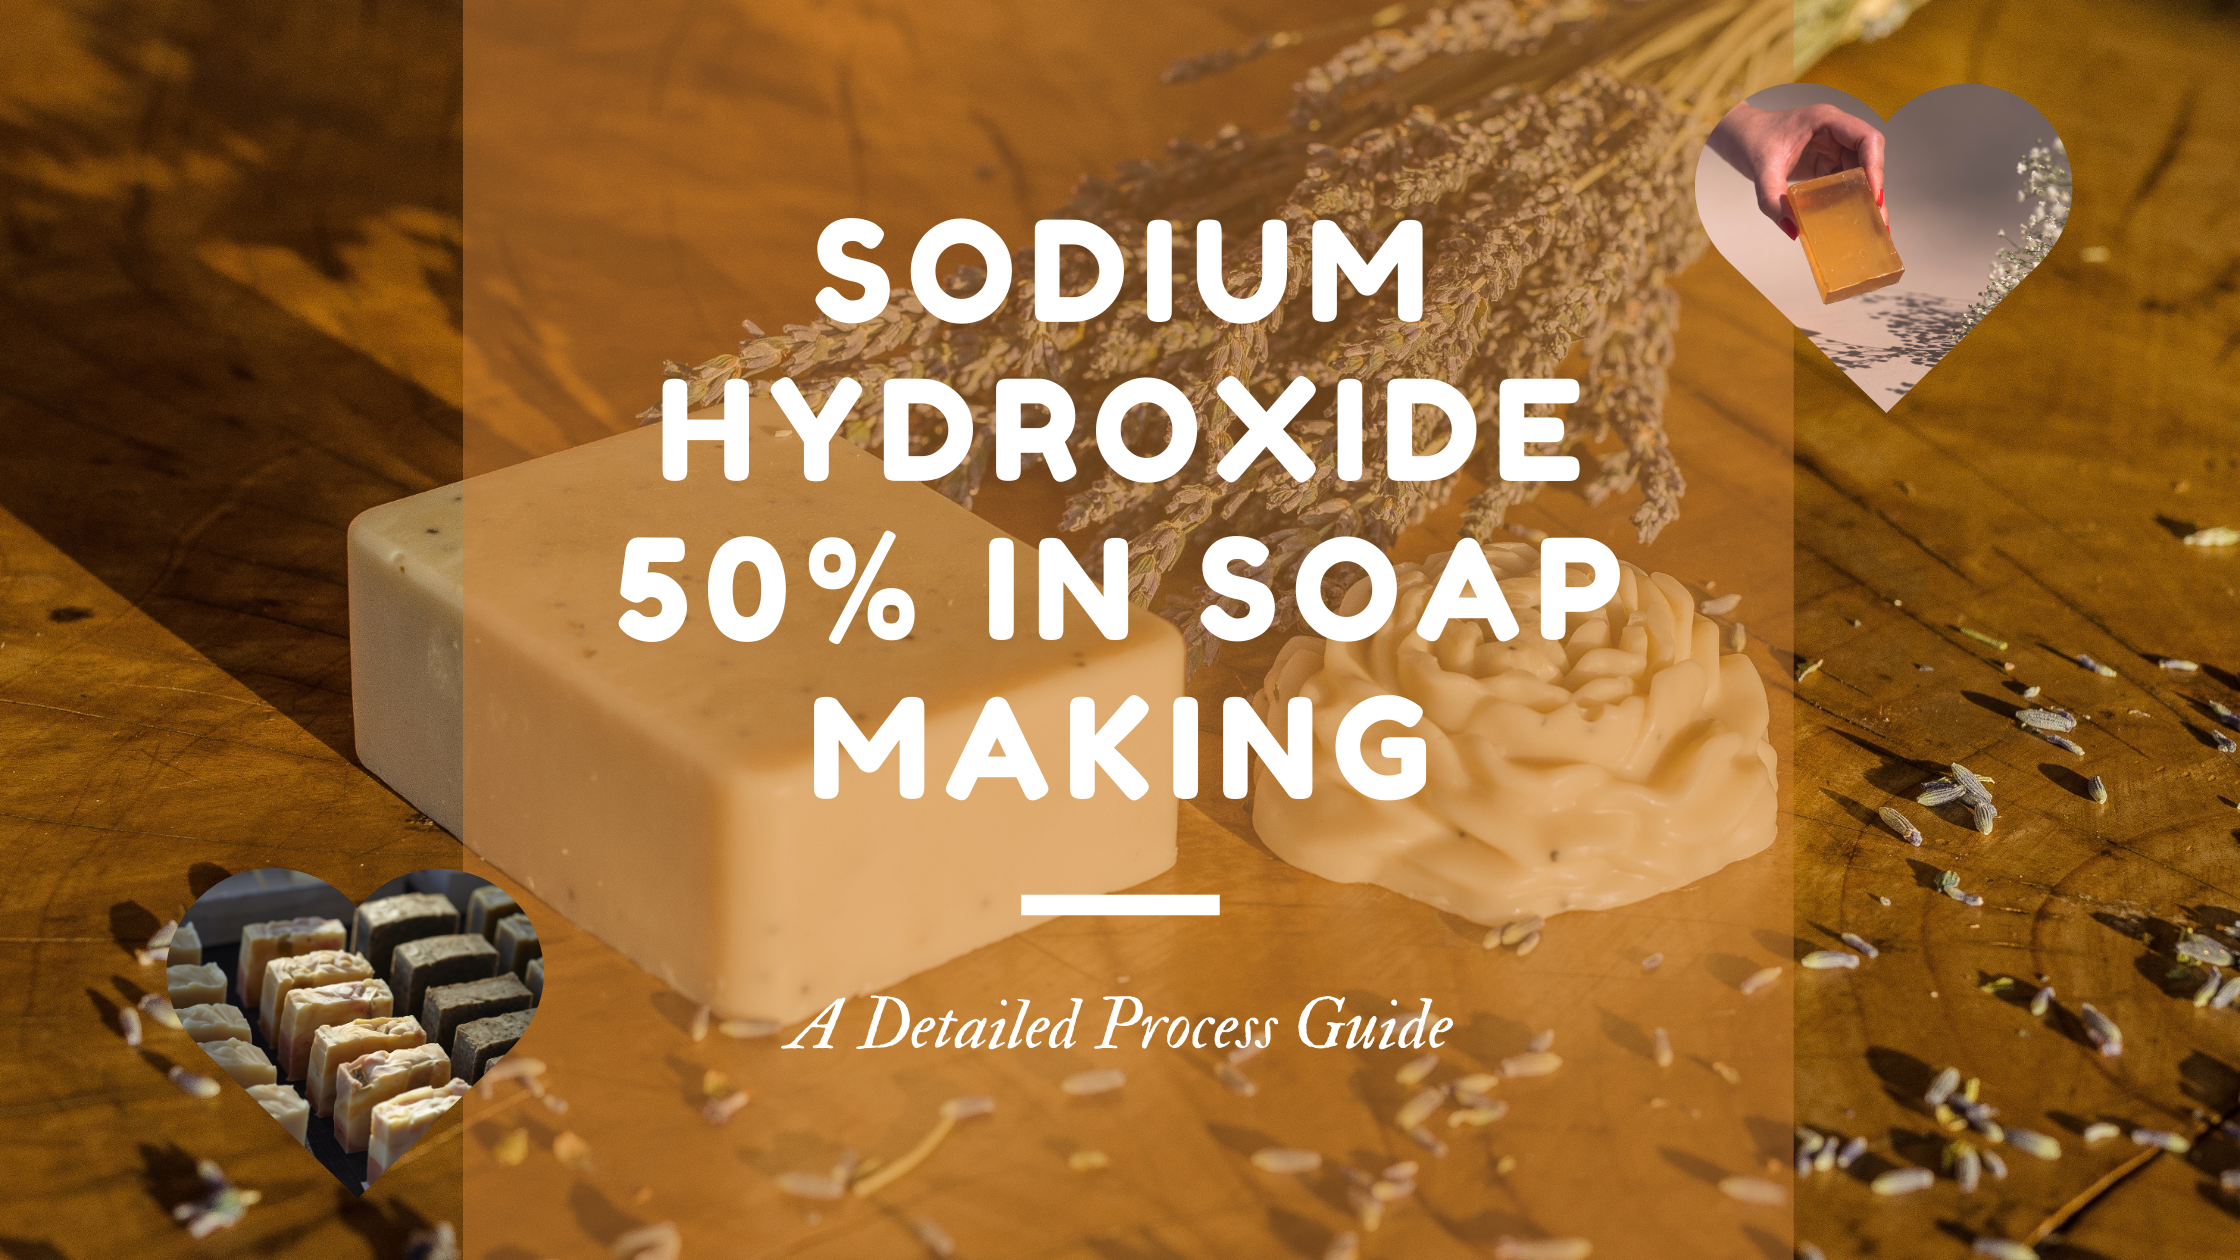 Sodium Hydroxide 50% in Soap Making: A Detailed Process Guide